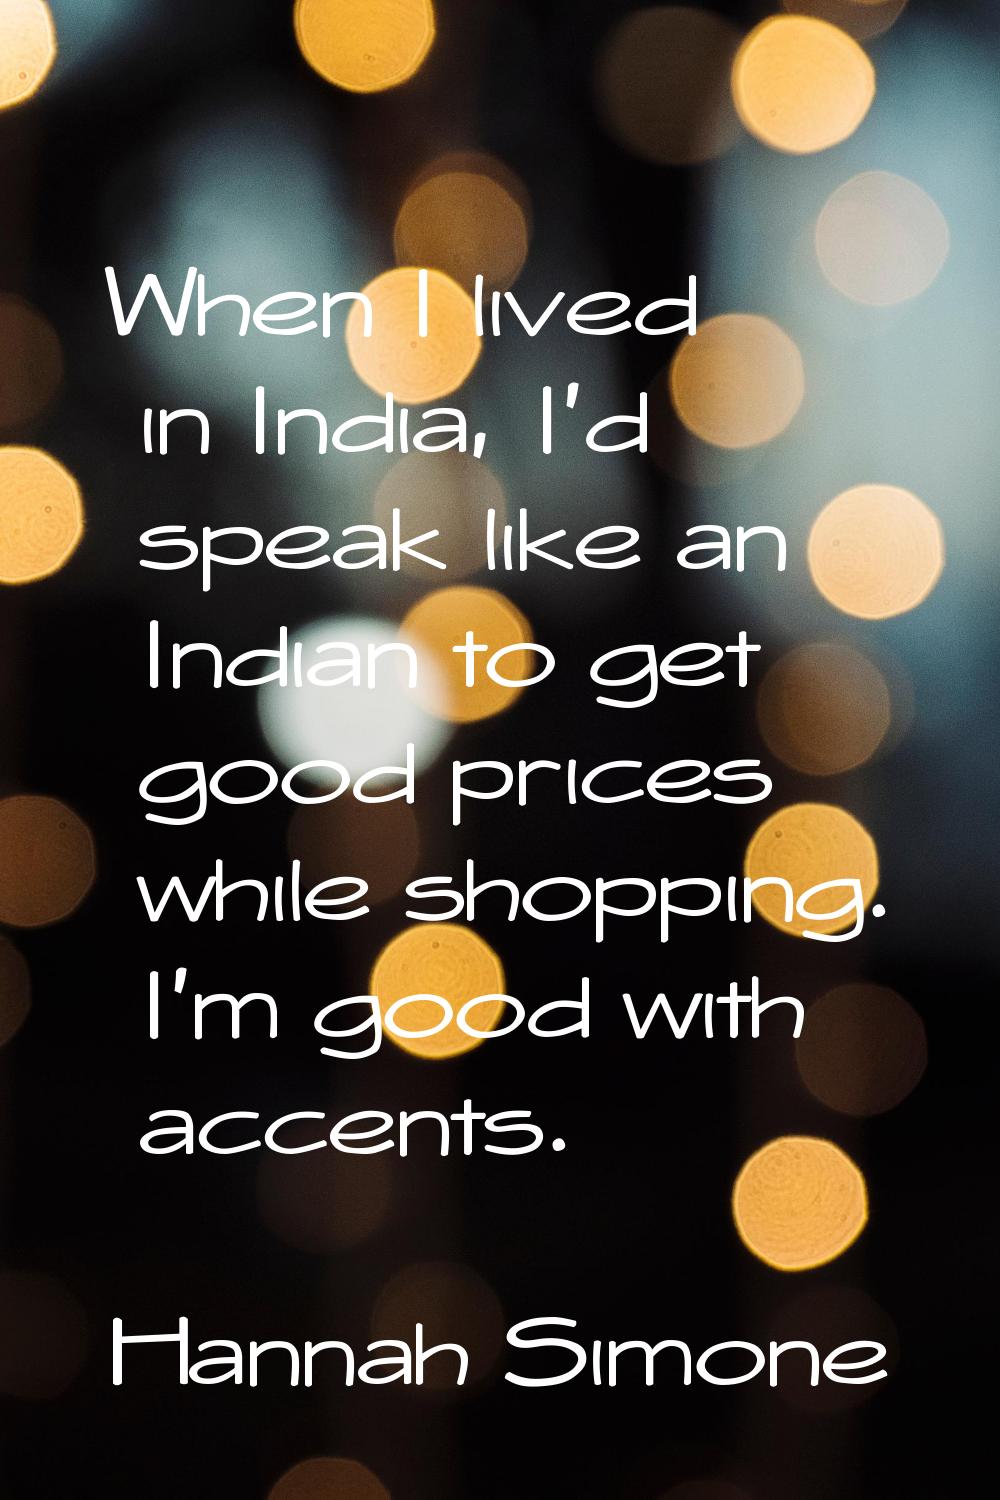 When I lived in India, I'd speak like an Indian to get good prices while shopping. I'm good with ac